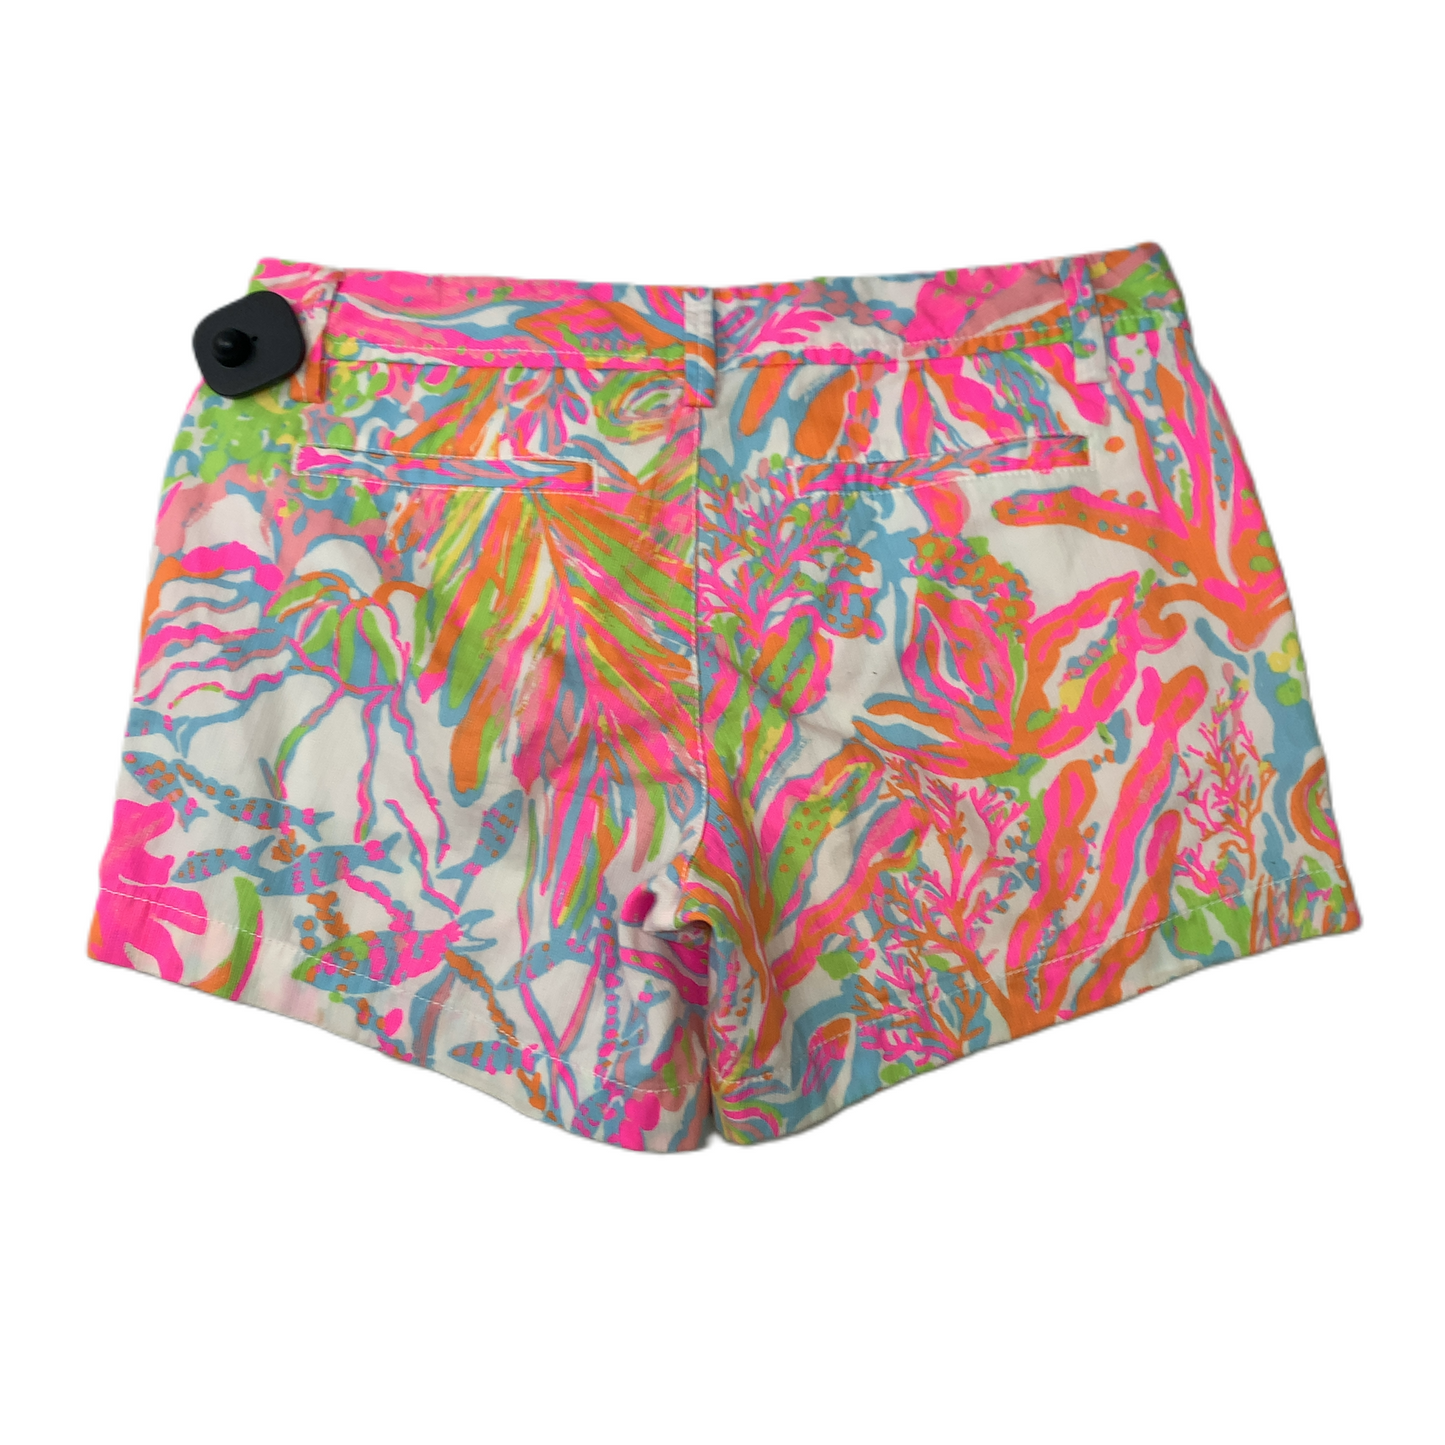 Multi-colored  Shorts Designer By Lilly Pulitzer  Size: 6